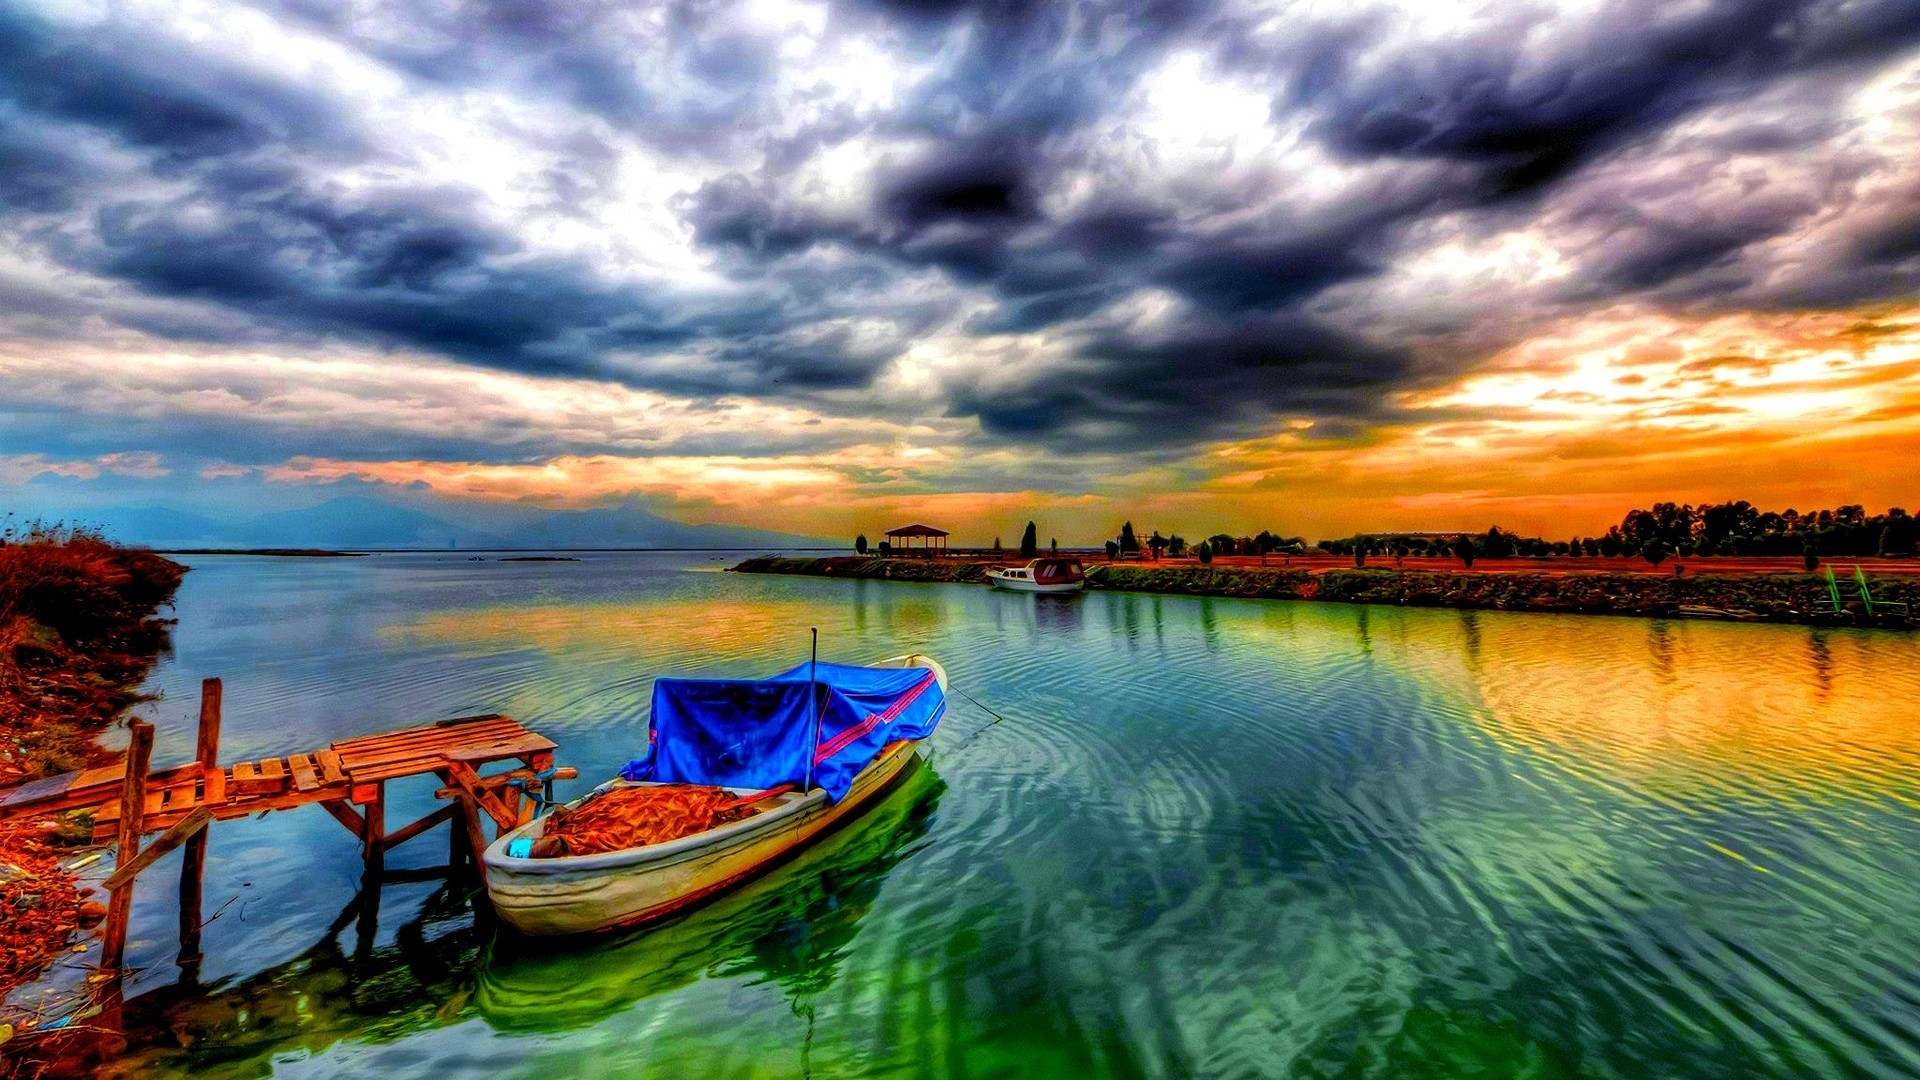 HDR Photography wallpaper | 1920x1080 | #48003